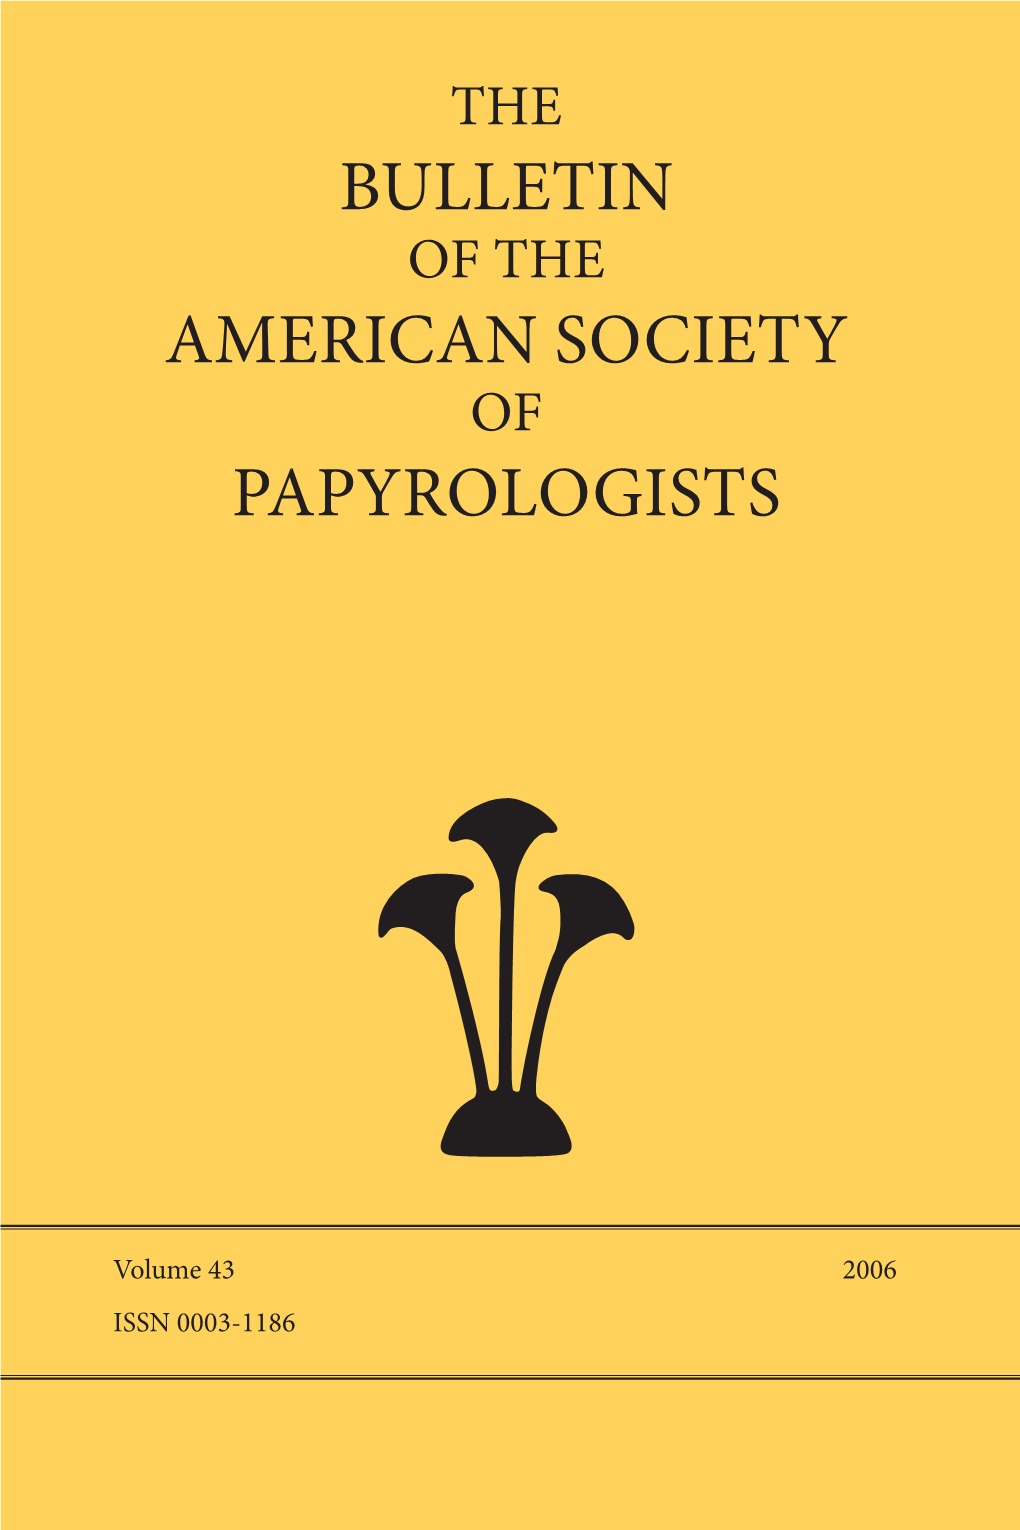 The Bulletin of the American Society of Papyrologists